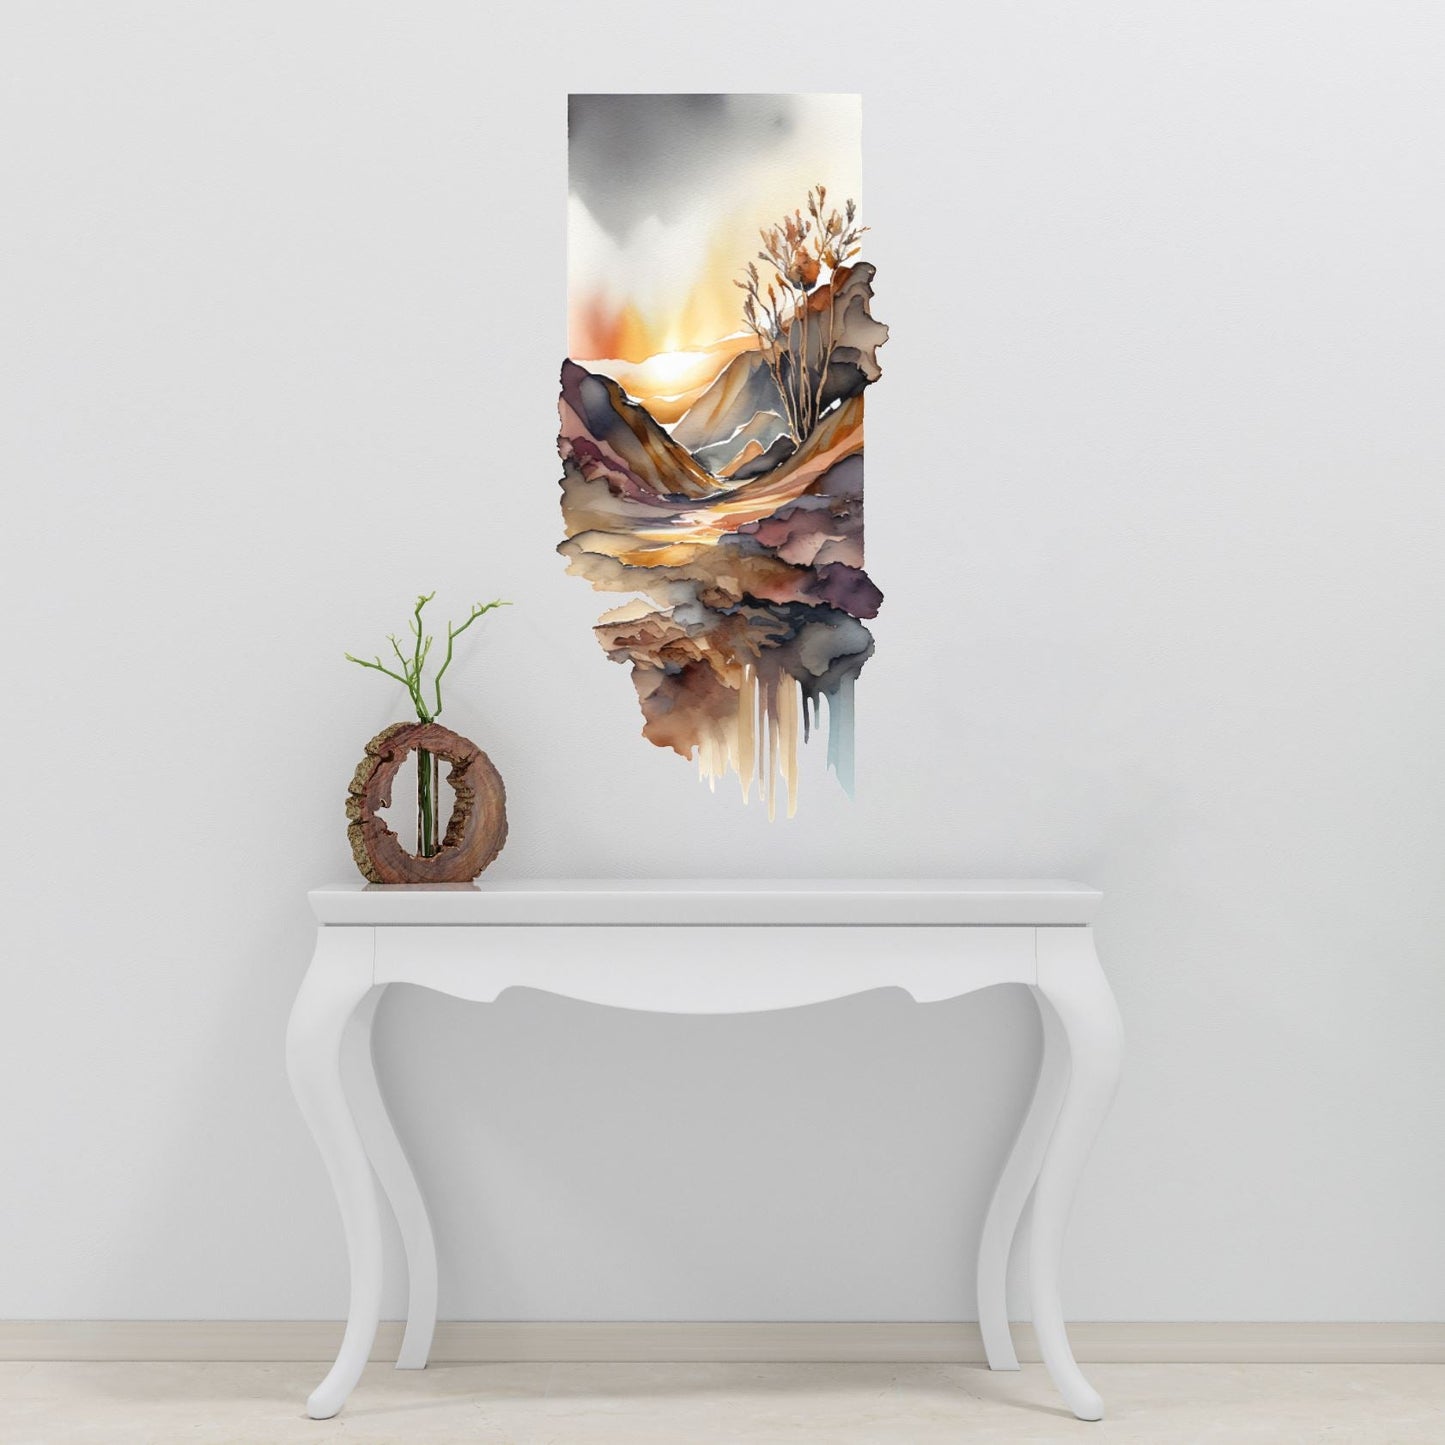 Watercolor Desert Wall Art Decal | Neutral Earth Tones | Abstract Desert Painting - Picture Perfect Decals